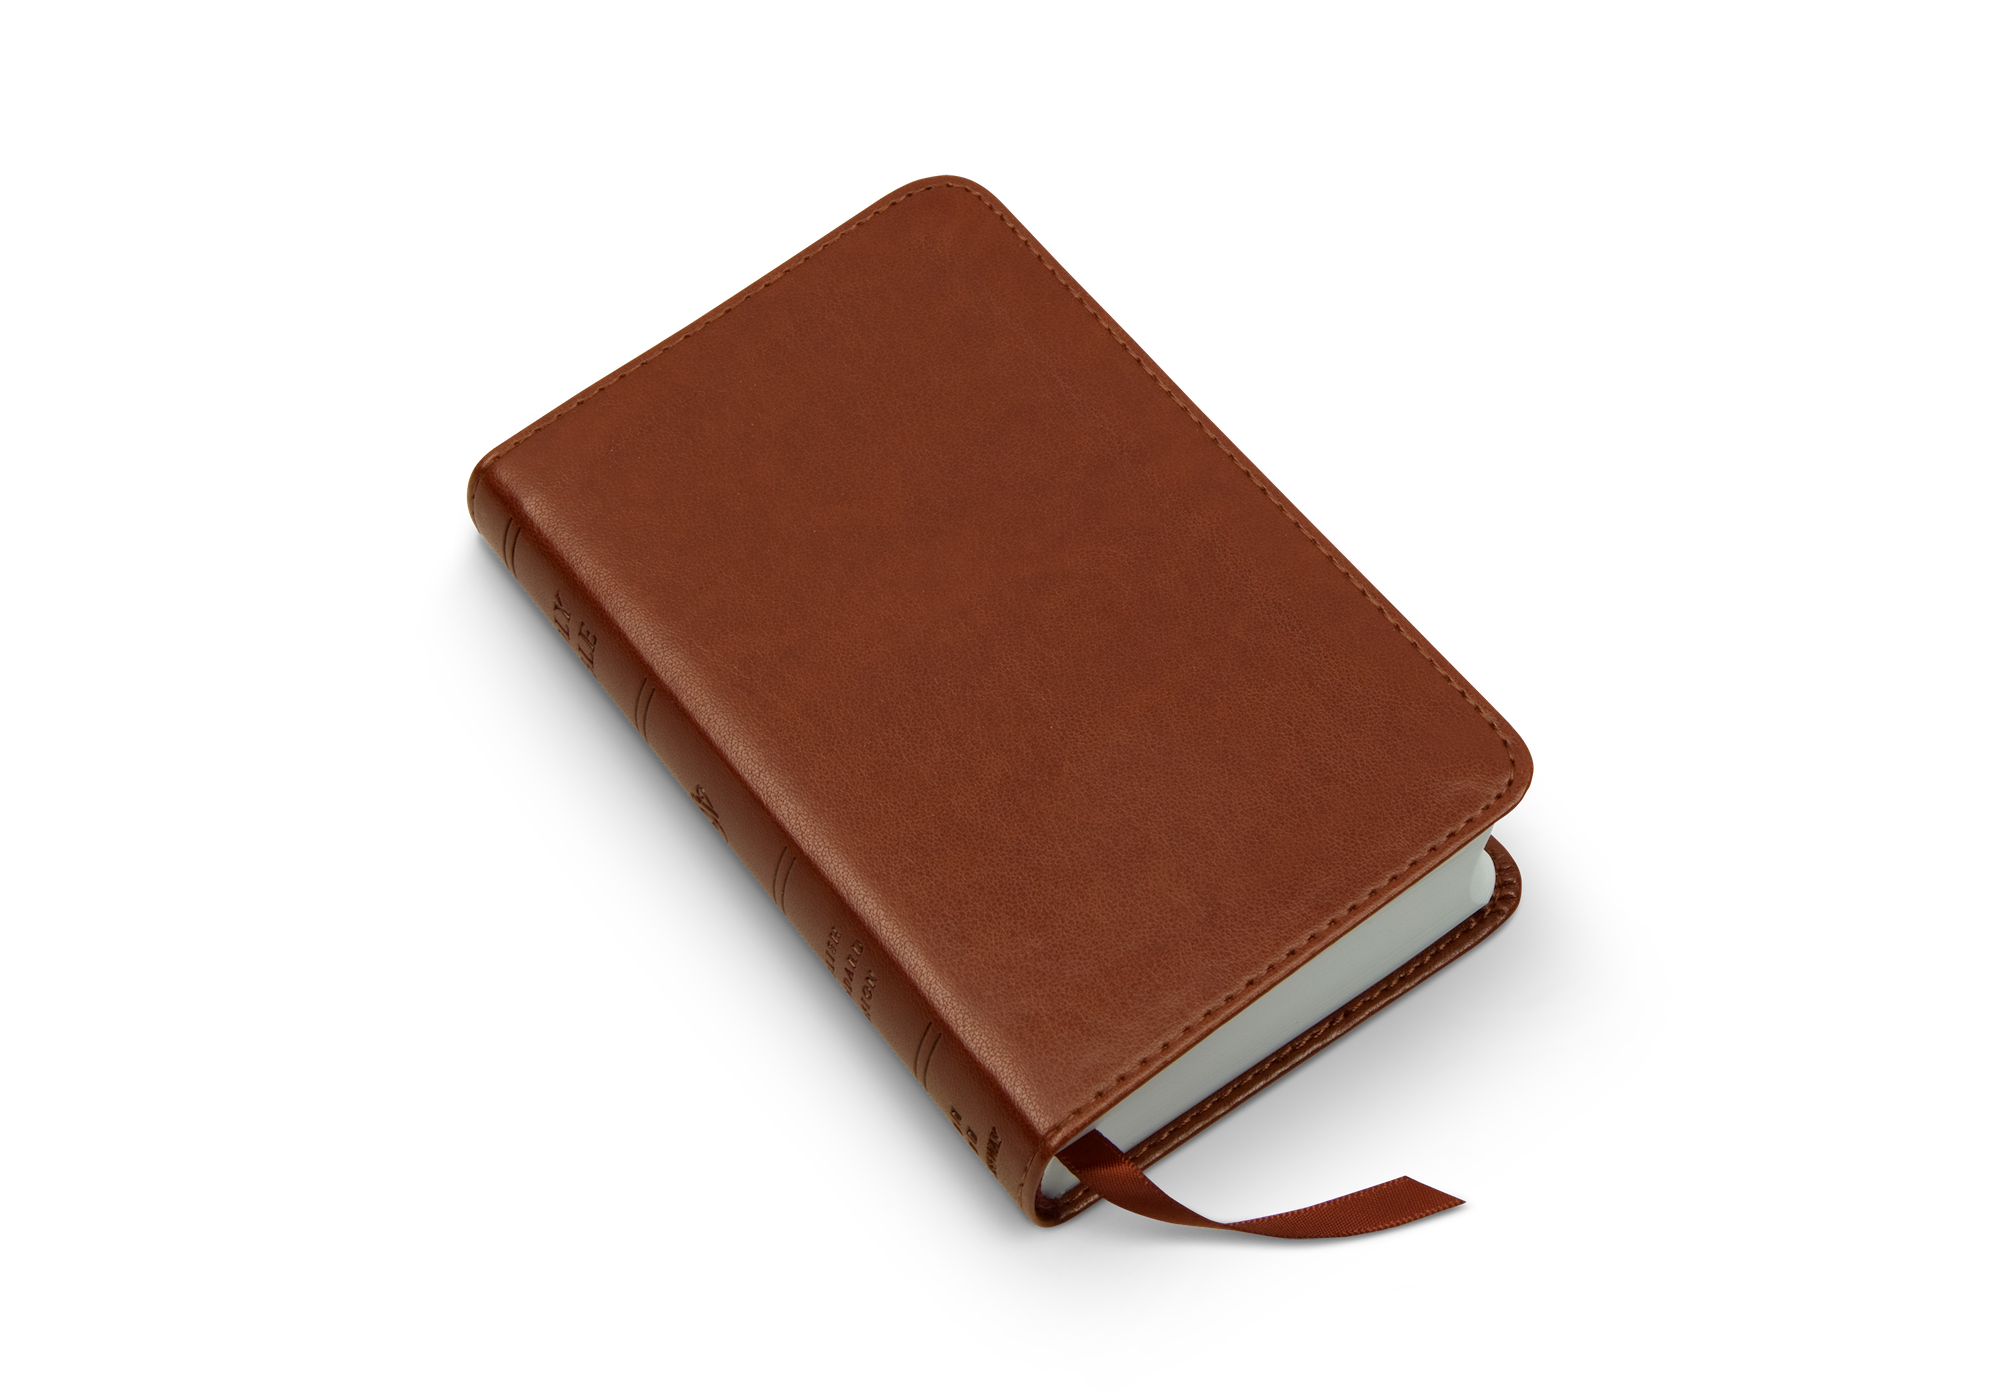 Leather Book Cover Transparent Background